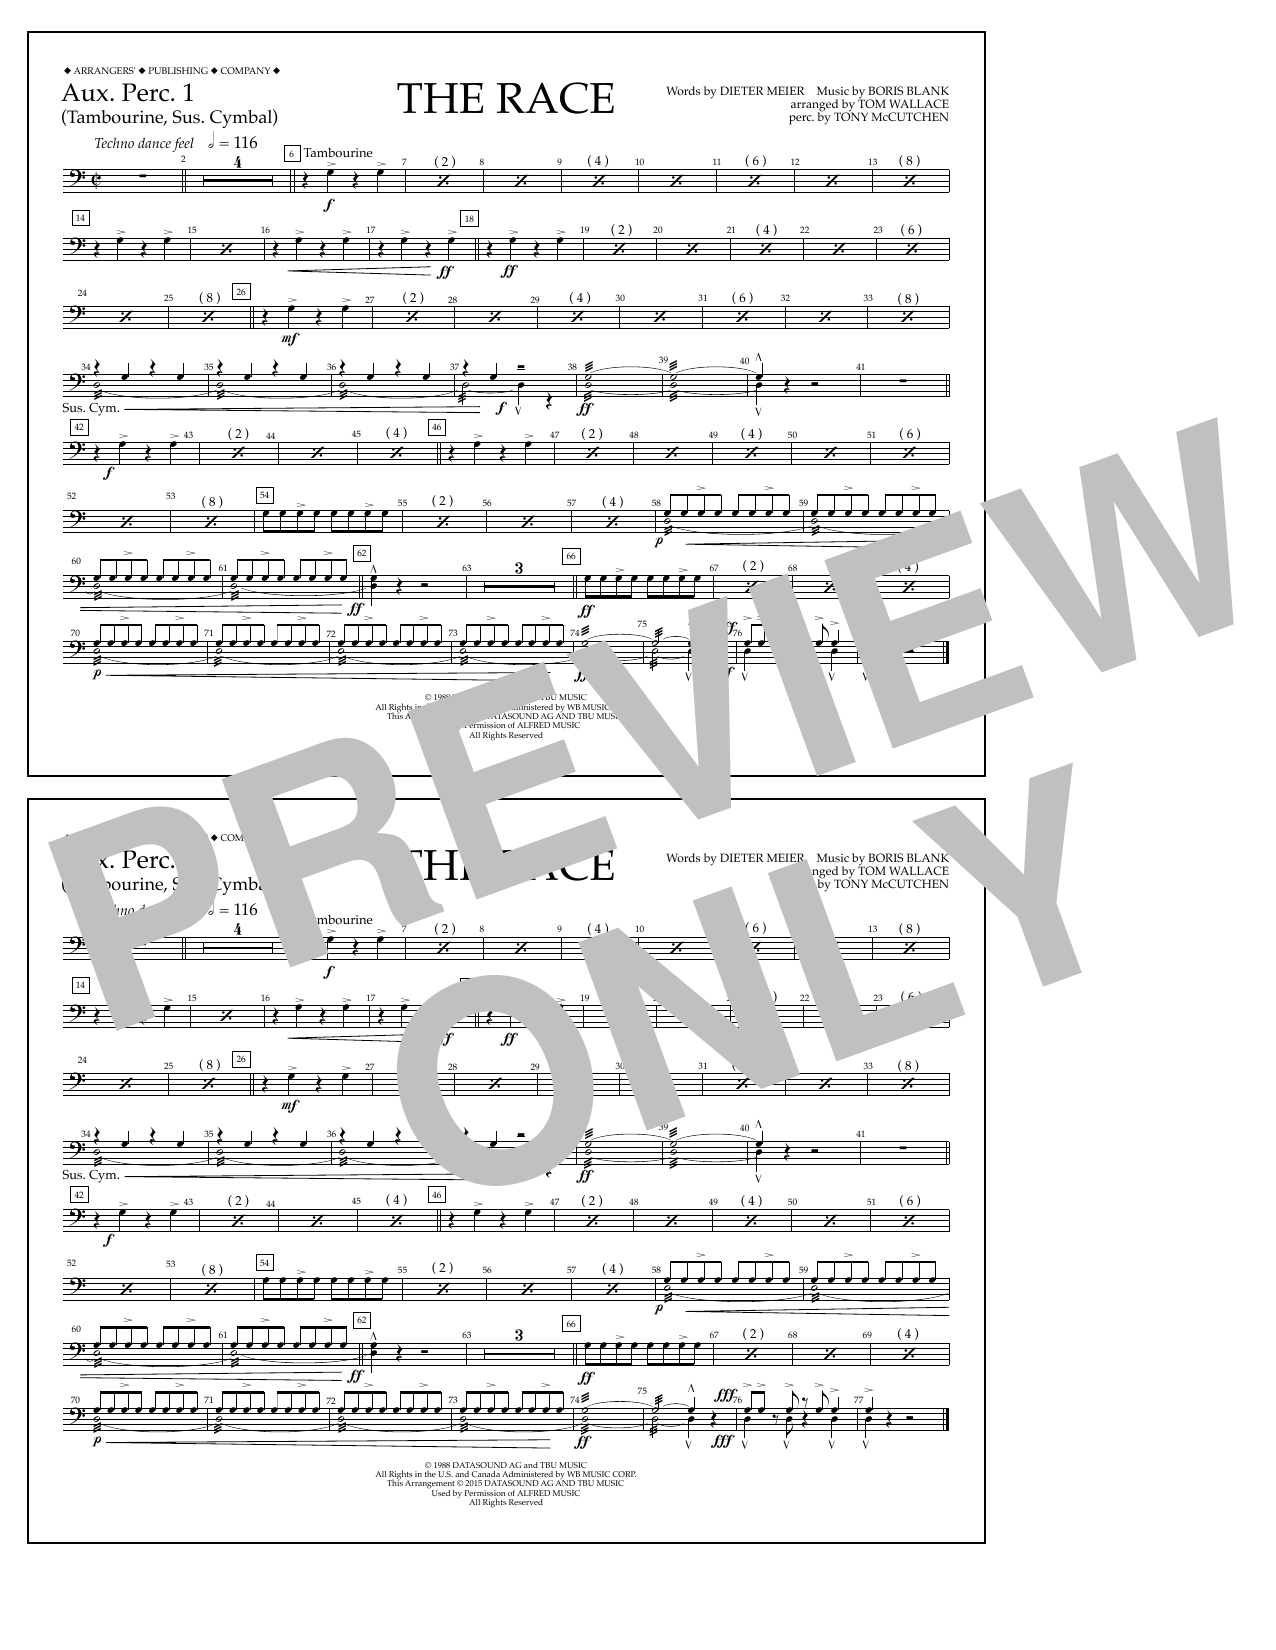 Download Tom Wallace The Race - Aux. Perc. 1 Sheet Music